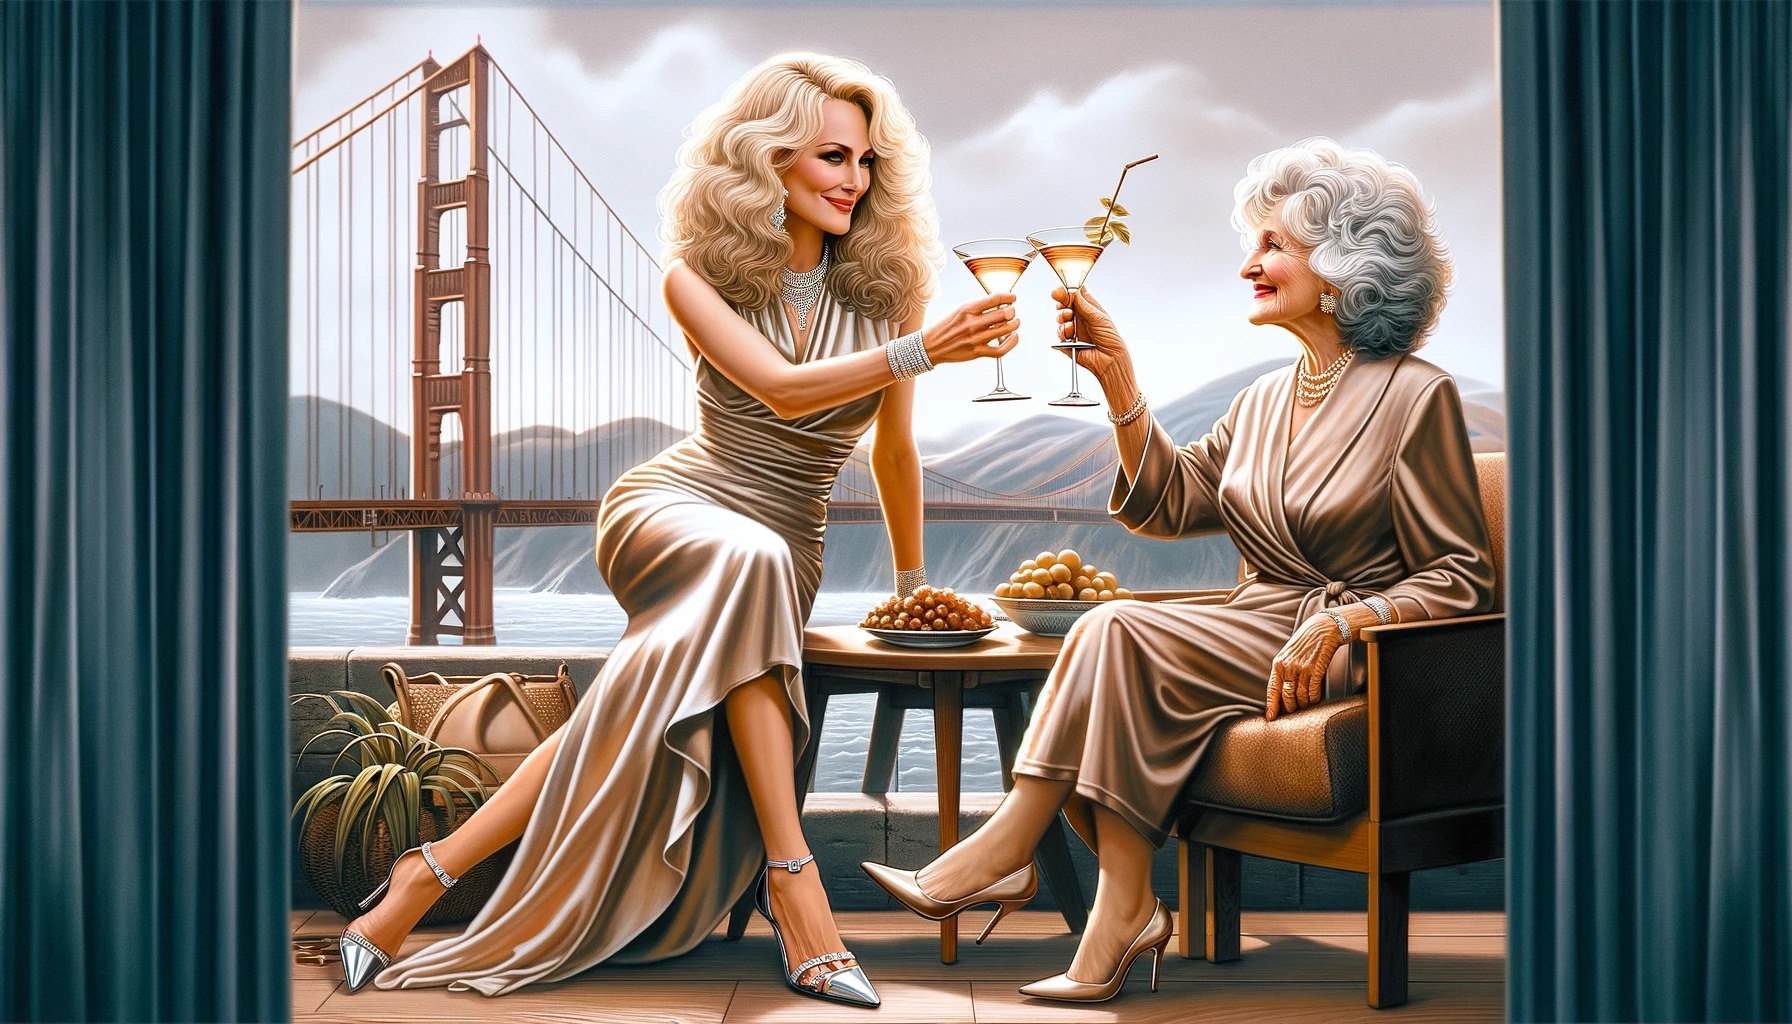 Kathy Fields and Marie Read celebrating Mother's Day in San Francisco with the Golden Gate Bridge